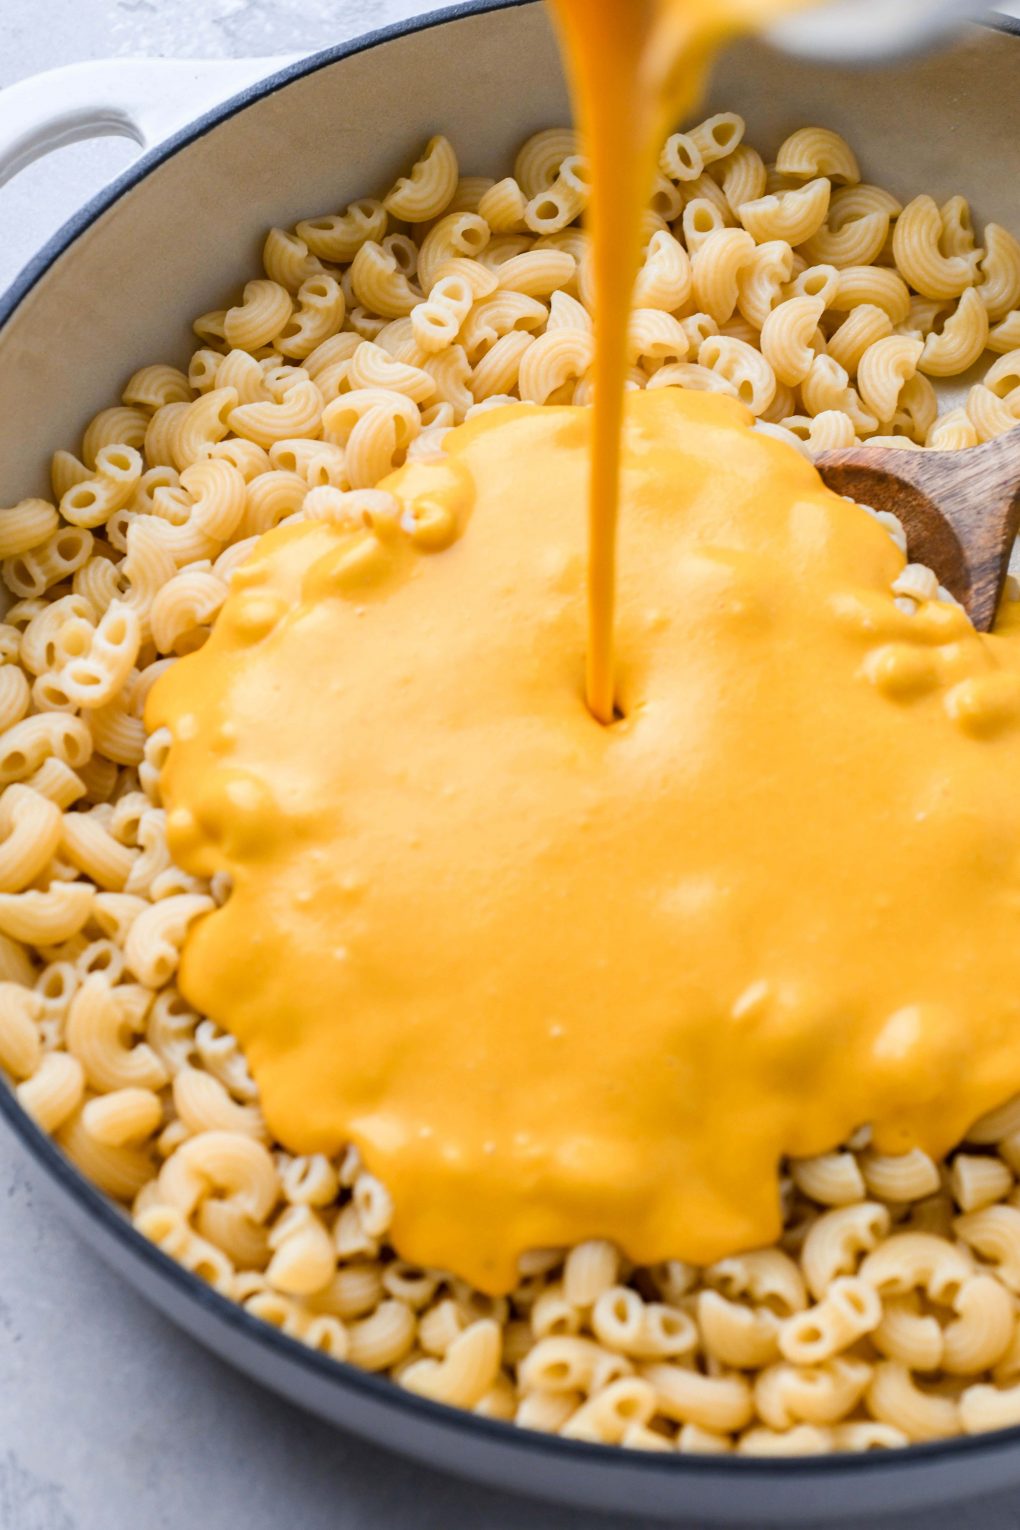 Close up shot of creamy vegan cheese being poured into a large skillet of cooked macaroni pasta.